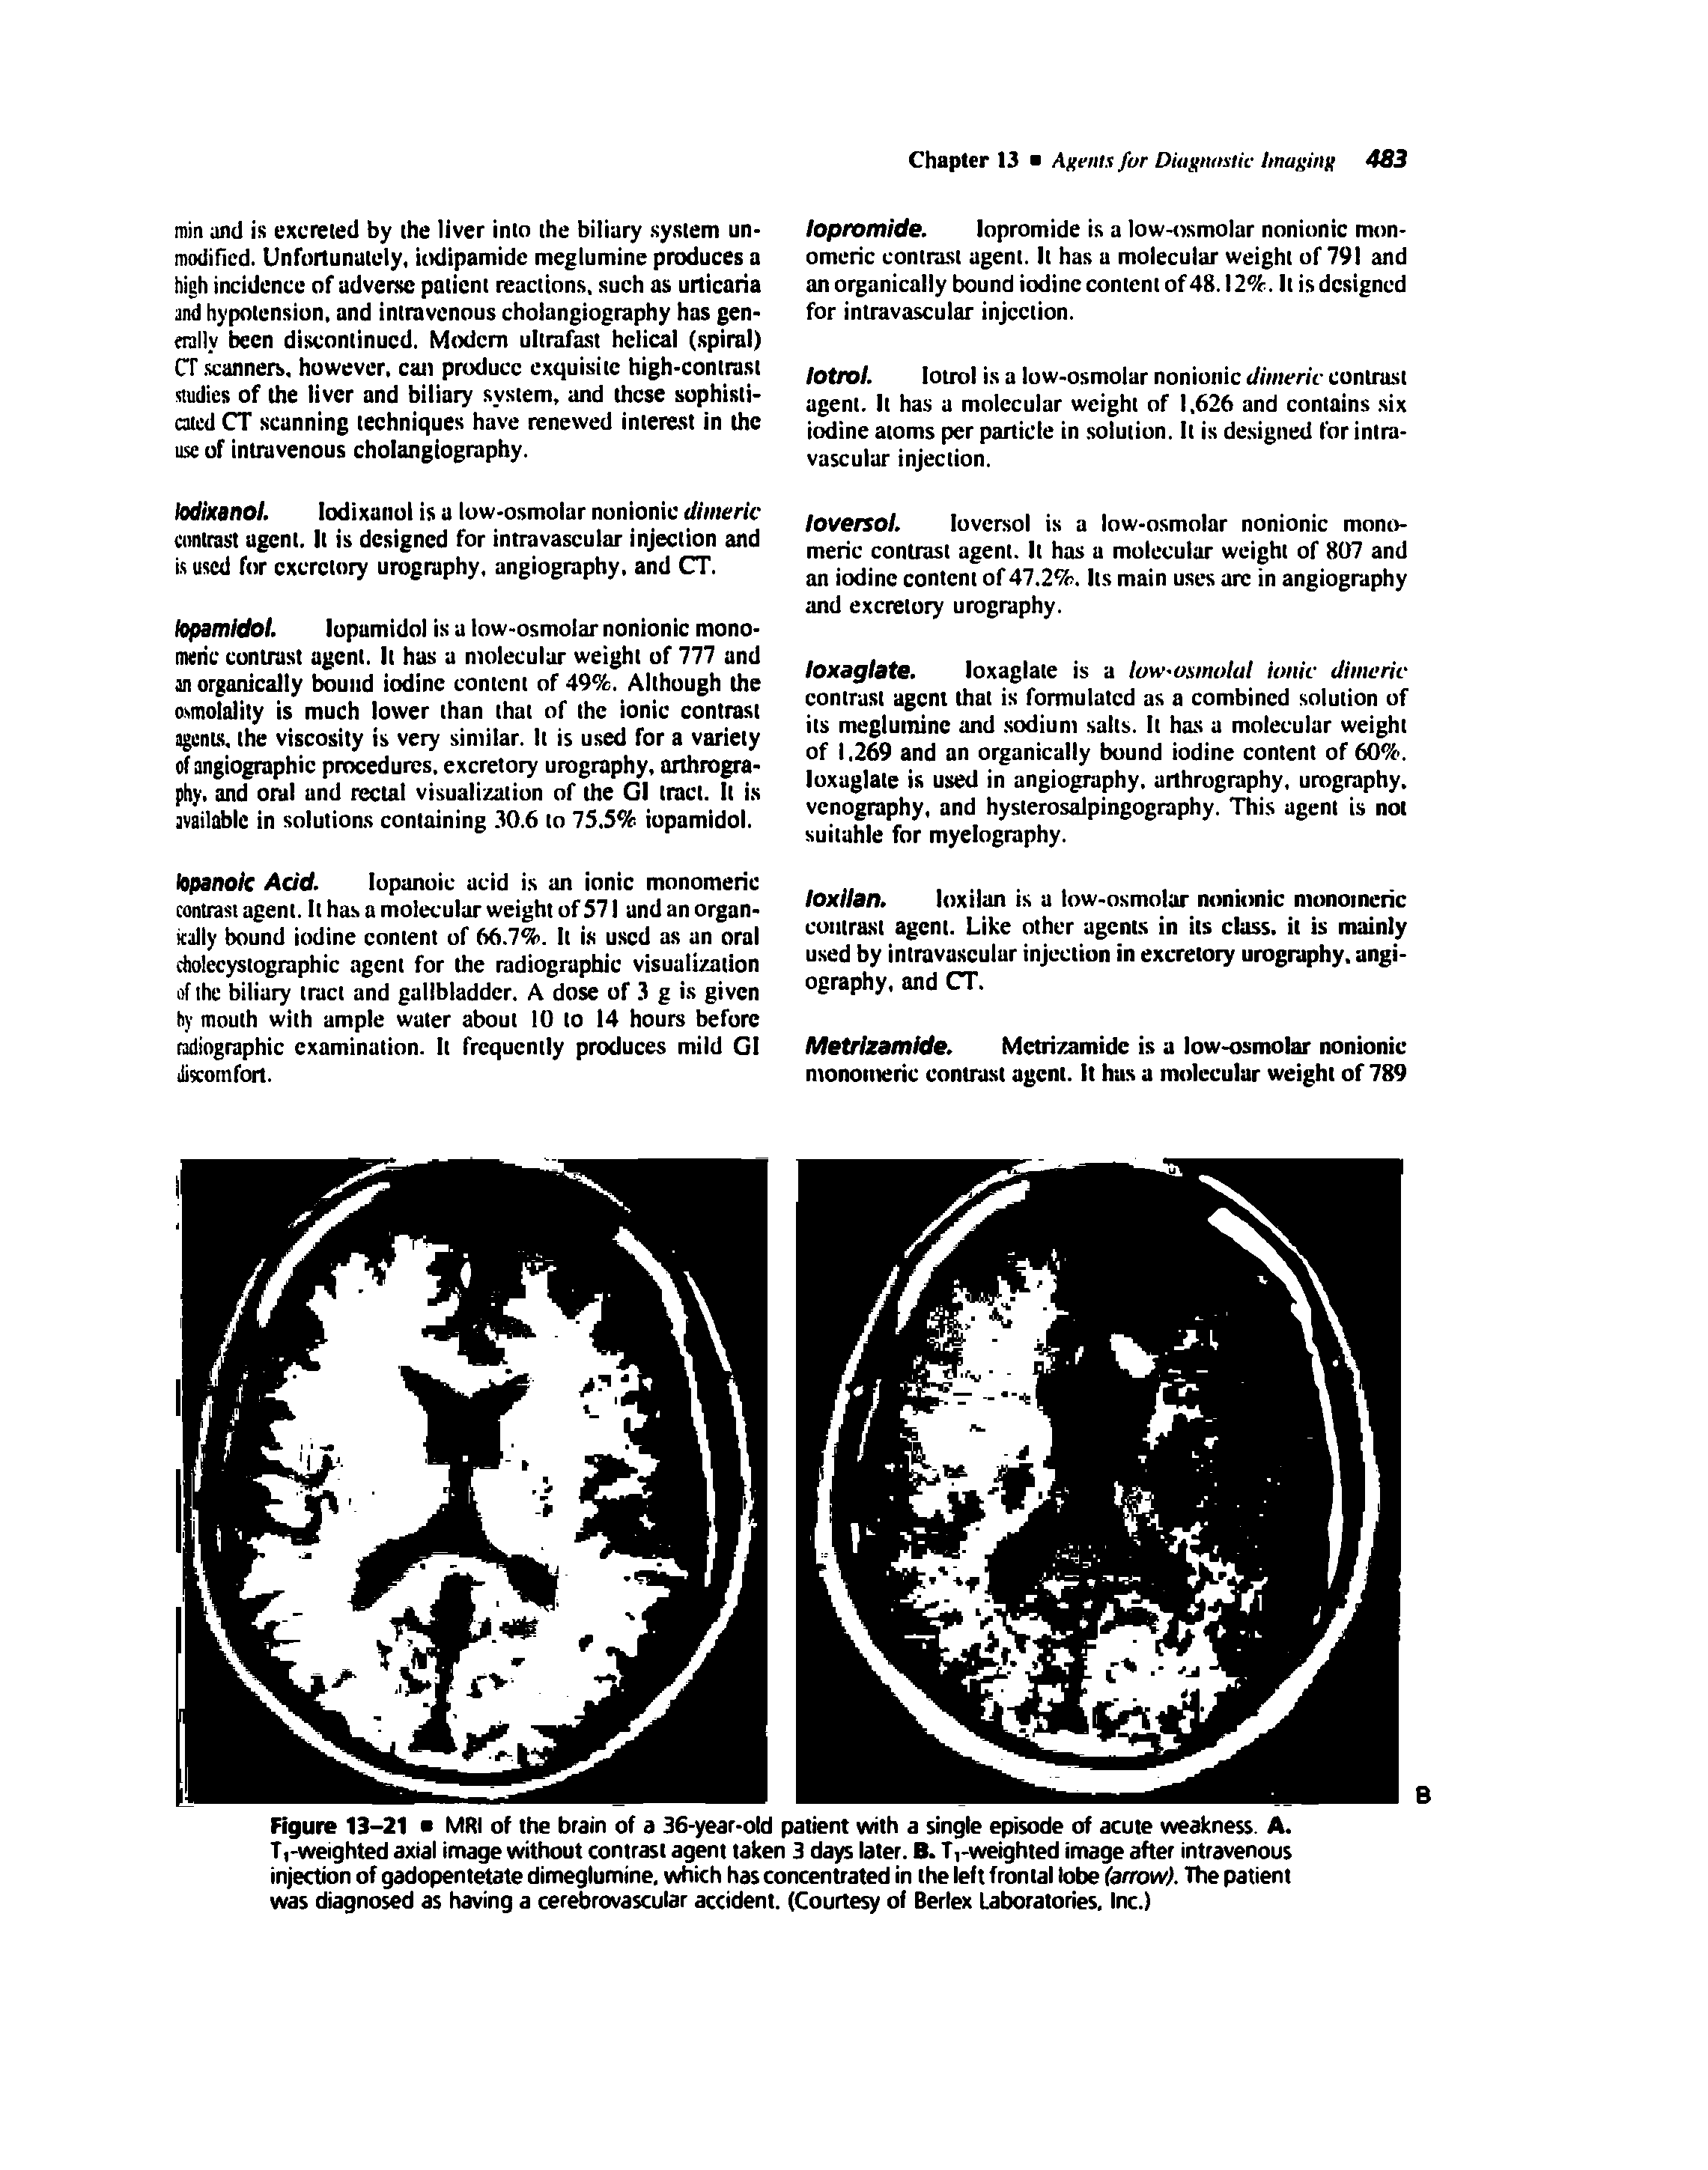 Figure 13-21 MRI of the brain of a 36-year-old patient with a single episode of acute weakness. A. T,-weighted axial image without contrast agent taken 3 days later. B. Ti-weighted image after intravenous injection of gadopentetate dimeglumine, which has concentrated in the left frontal lobe (arrow). The patient was diagnosed as having a cerebrovascular accident. (Courtesy of Berlex Laboratories. Inc.)...